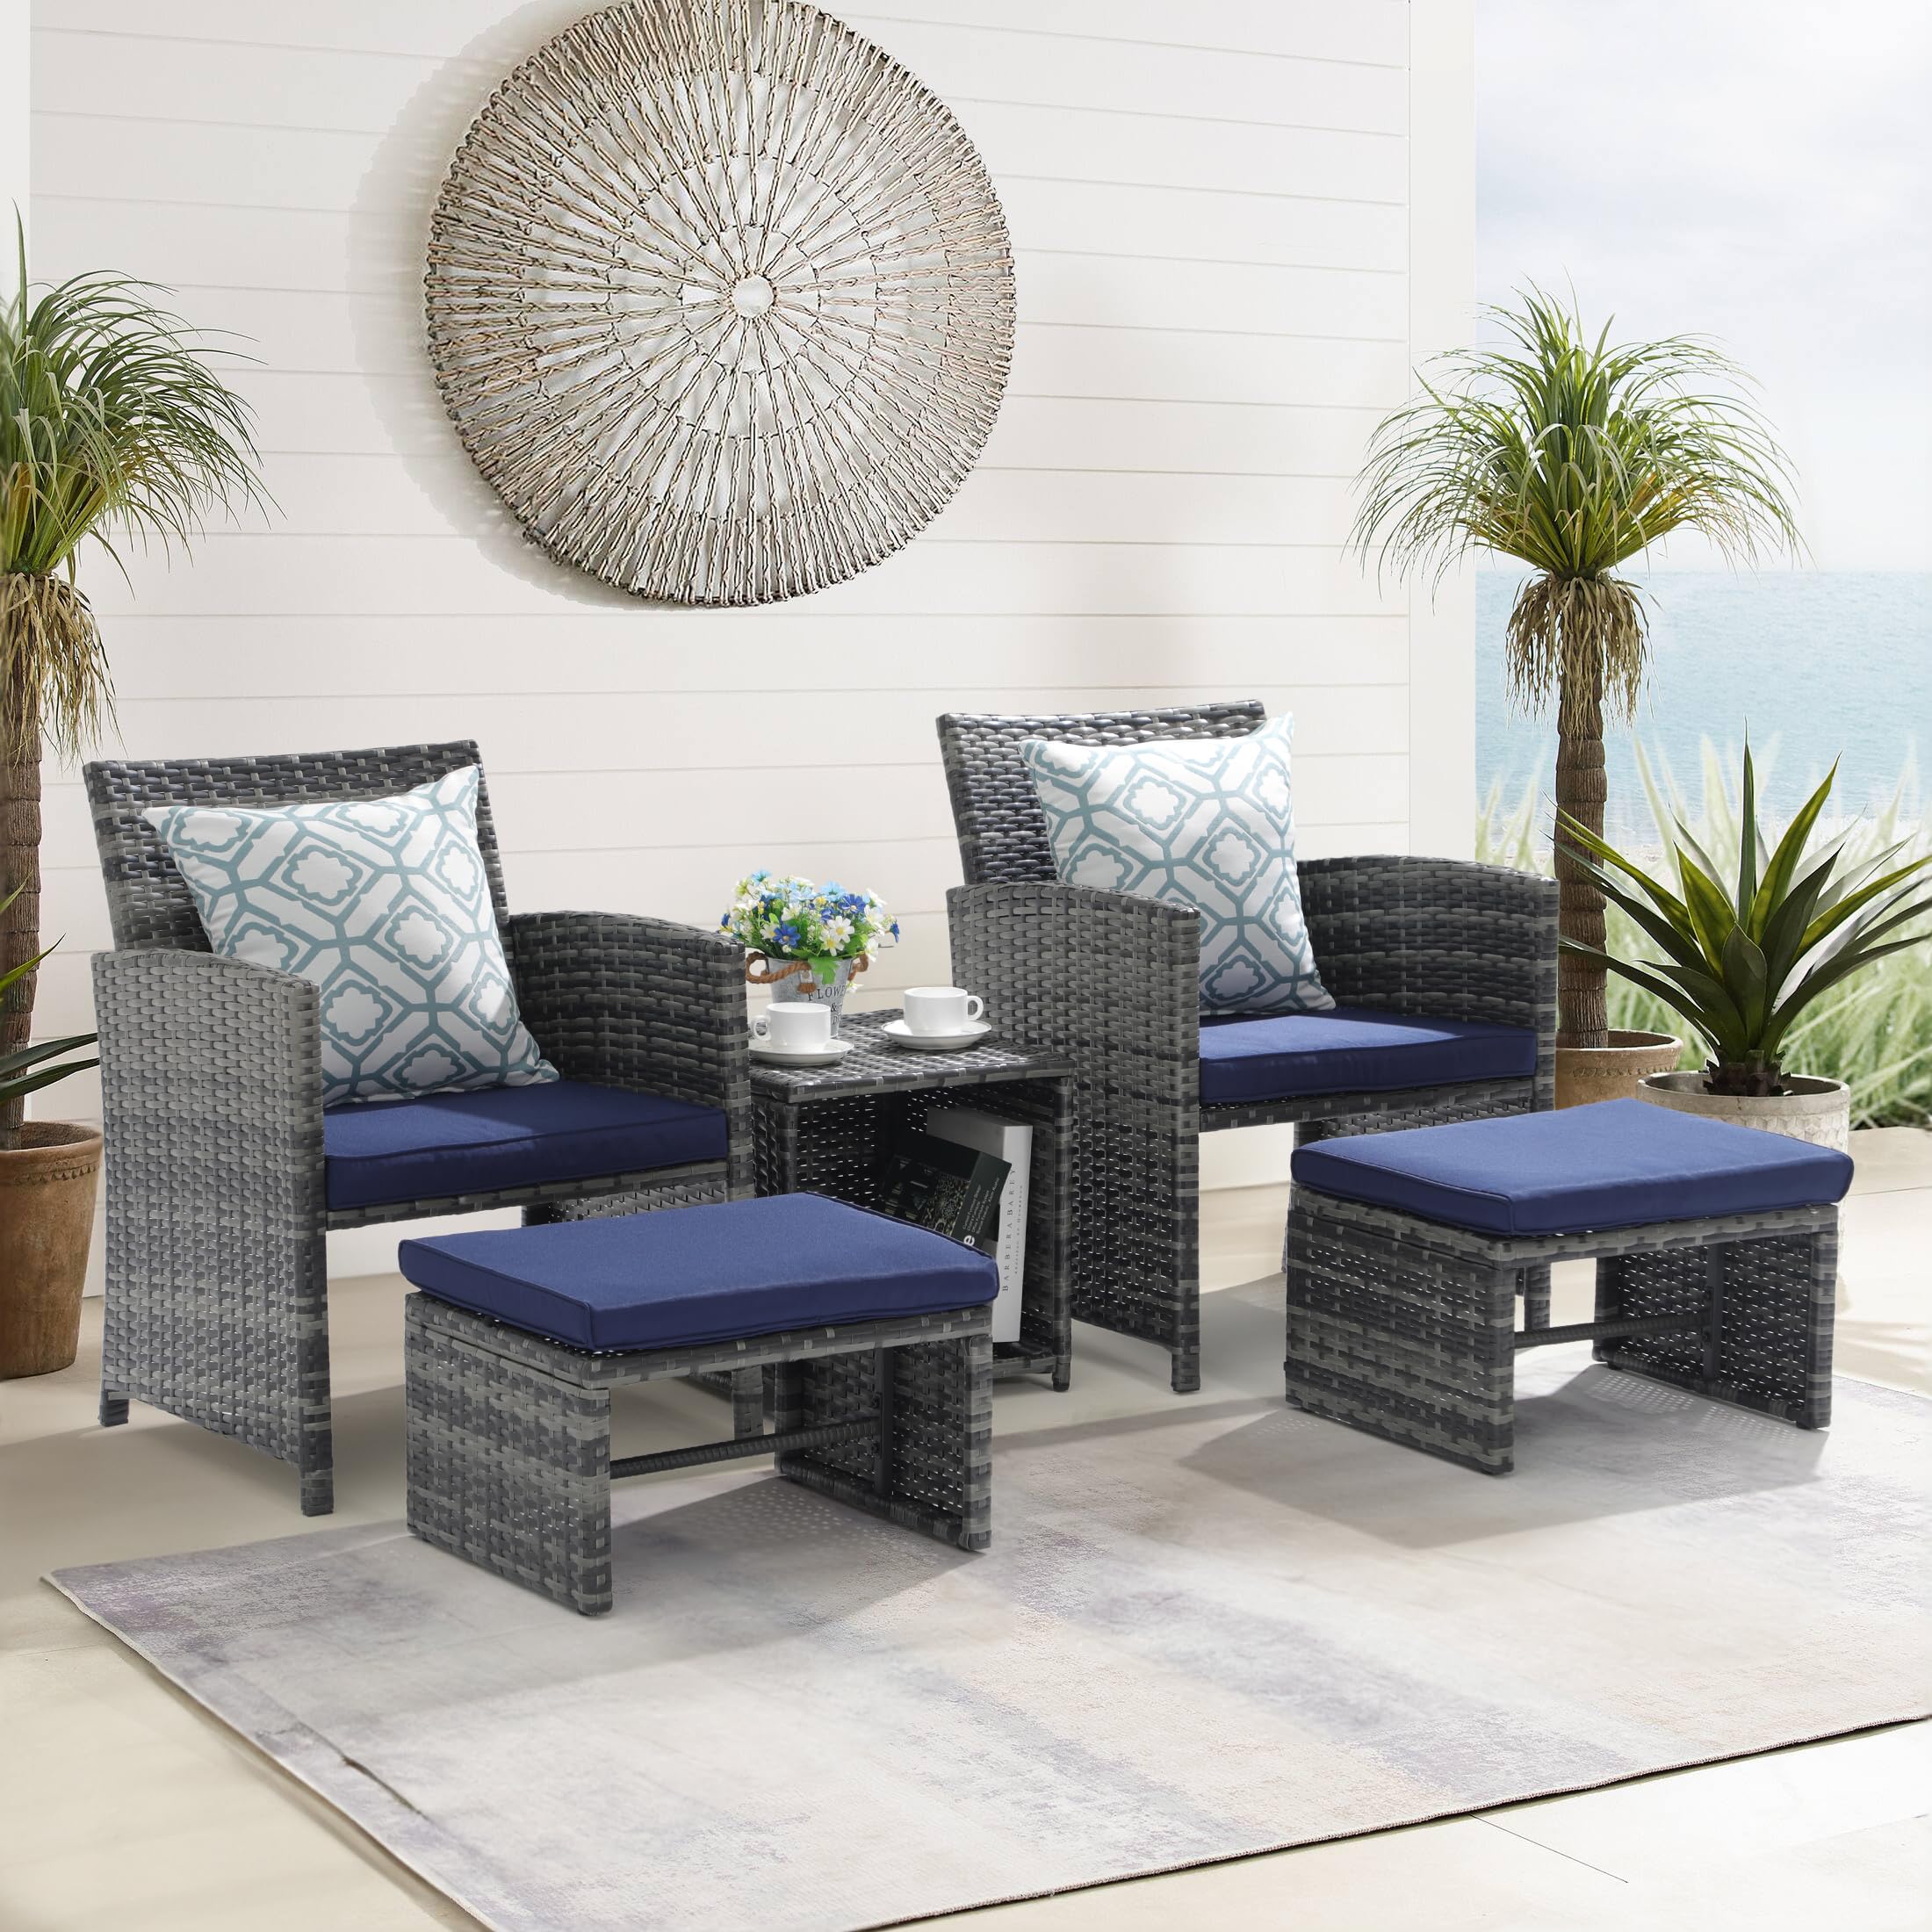 5pcs Wicker Patio Chair with Pull Out Ottomans & Storage Side Table,3 Cushon Colors